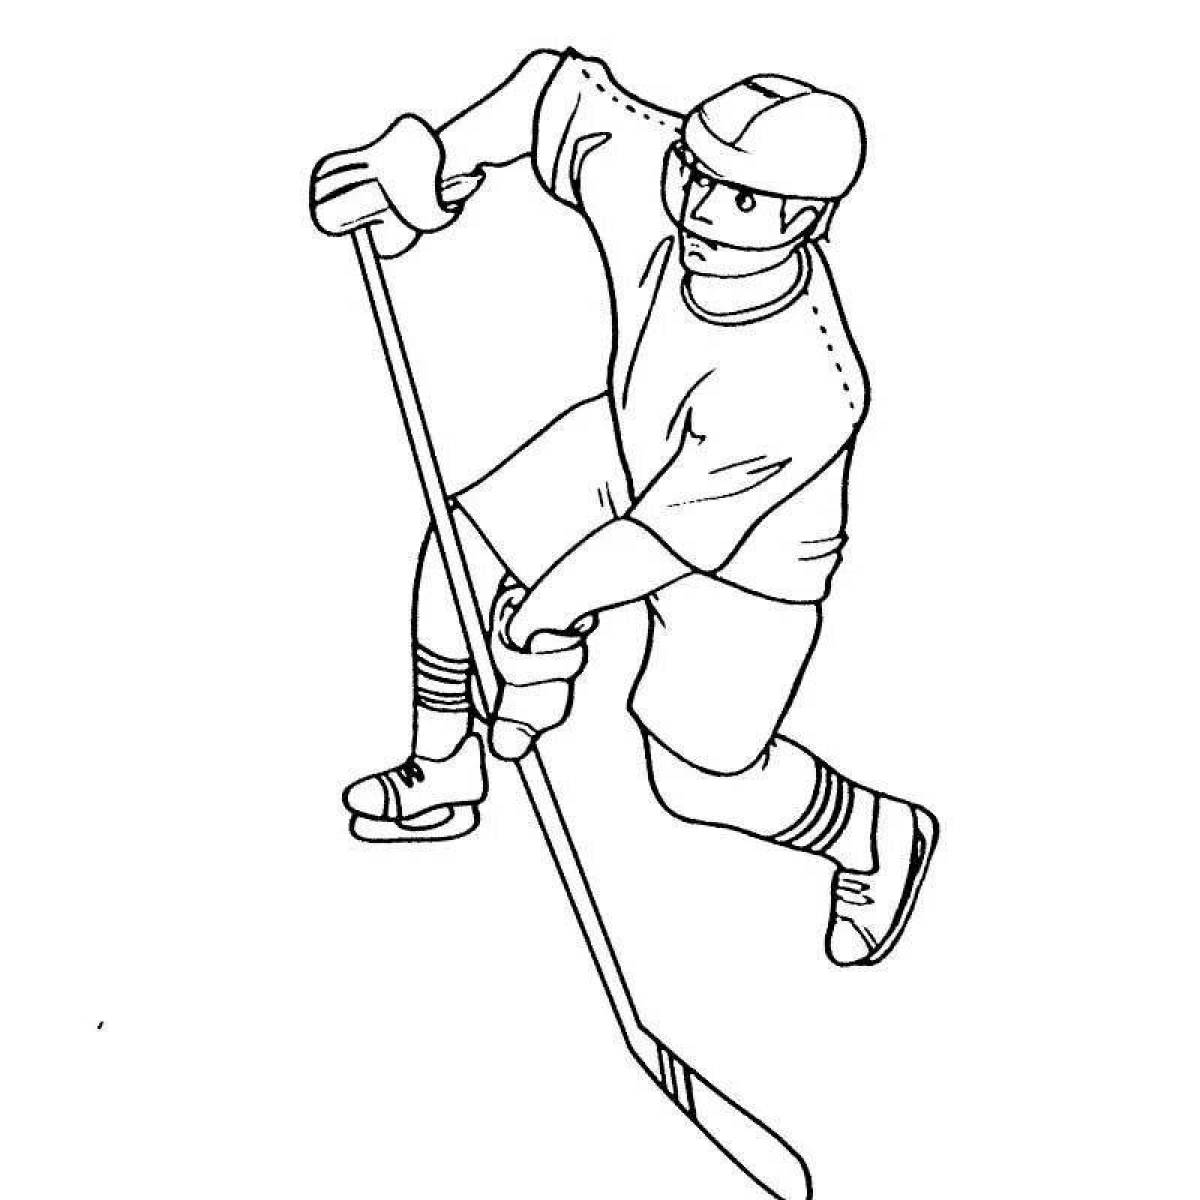 Dazzling winter sports coloring page for preschoolers